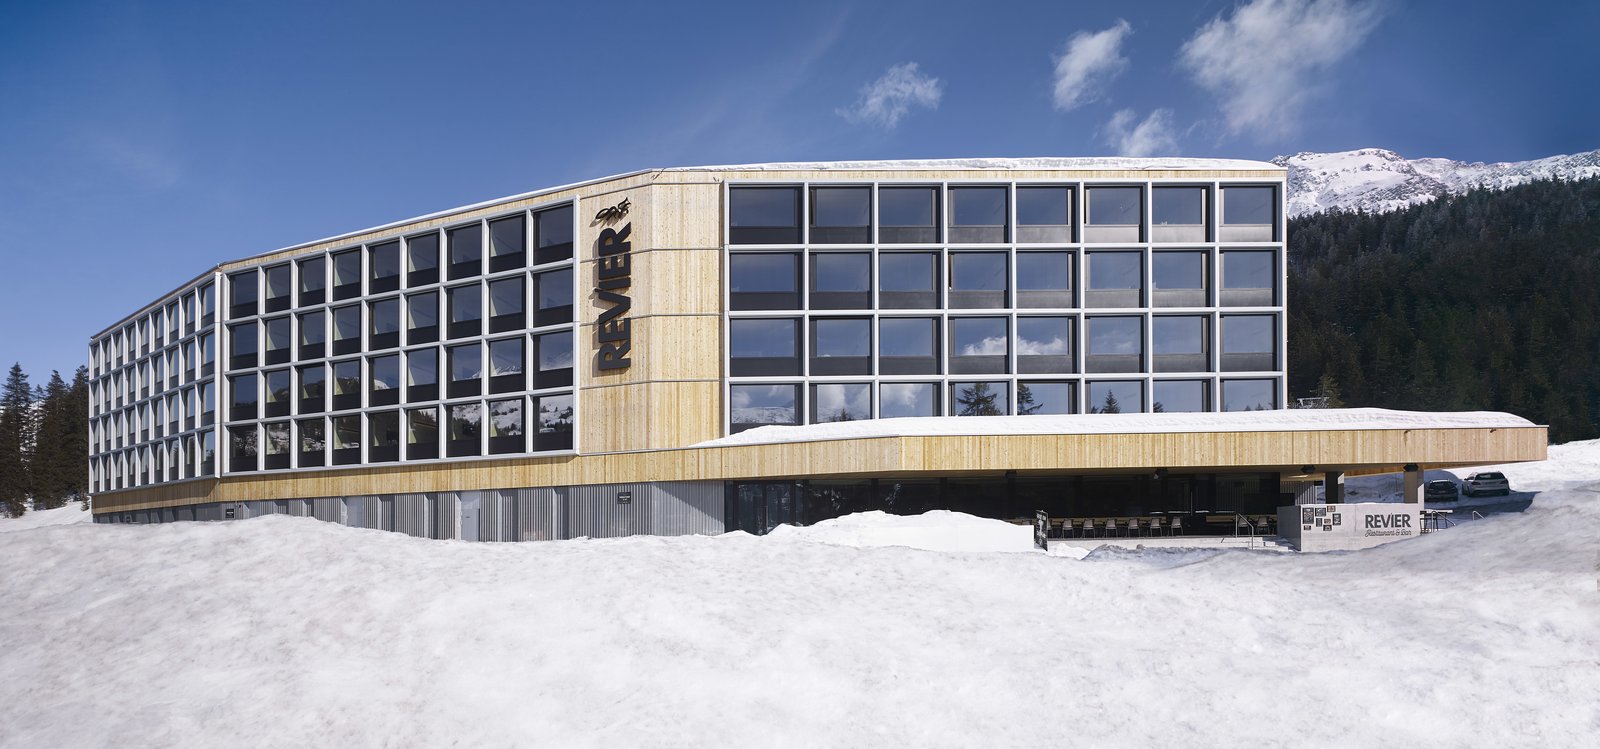 This Hotel in the Swiss Alps Is Made Up of 96 Prefab Modules